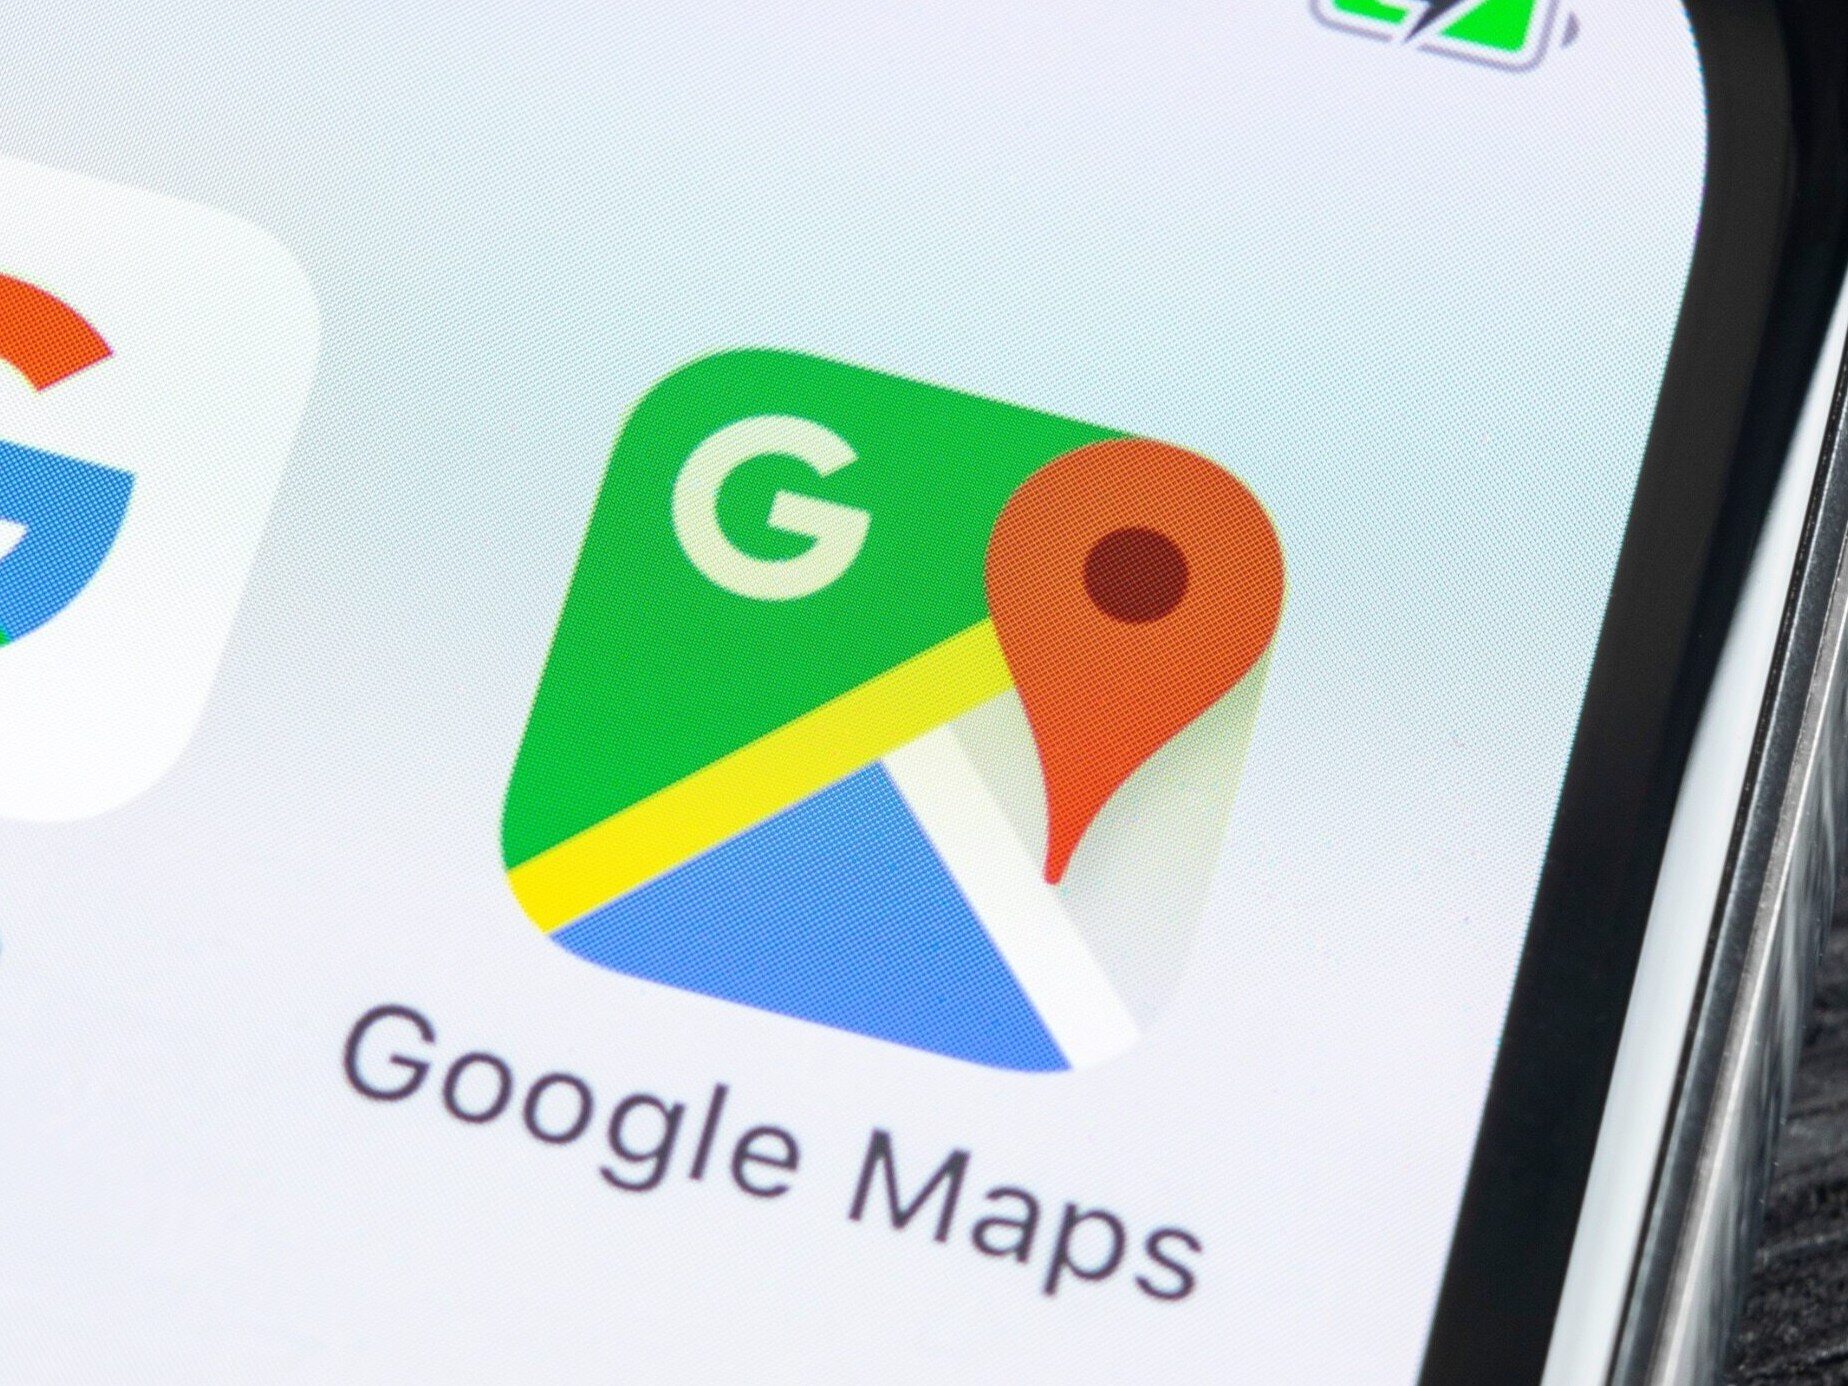 Google Maps update.  The application will better protect users' privacy